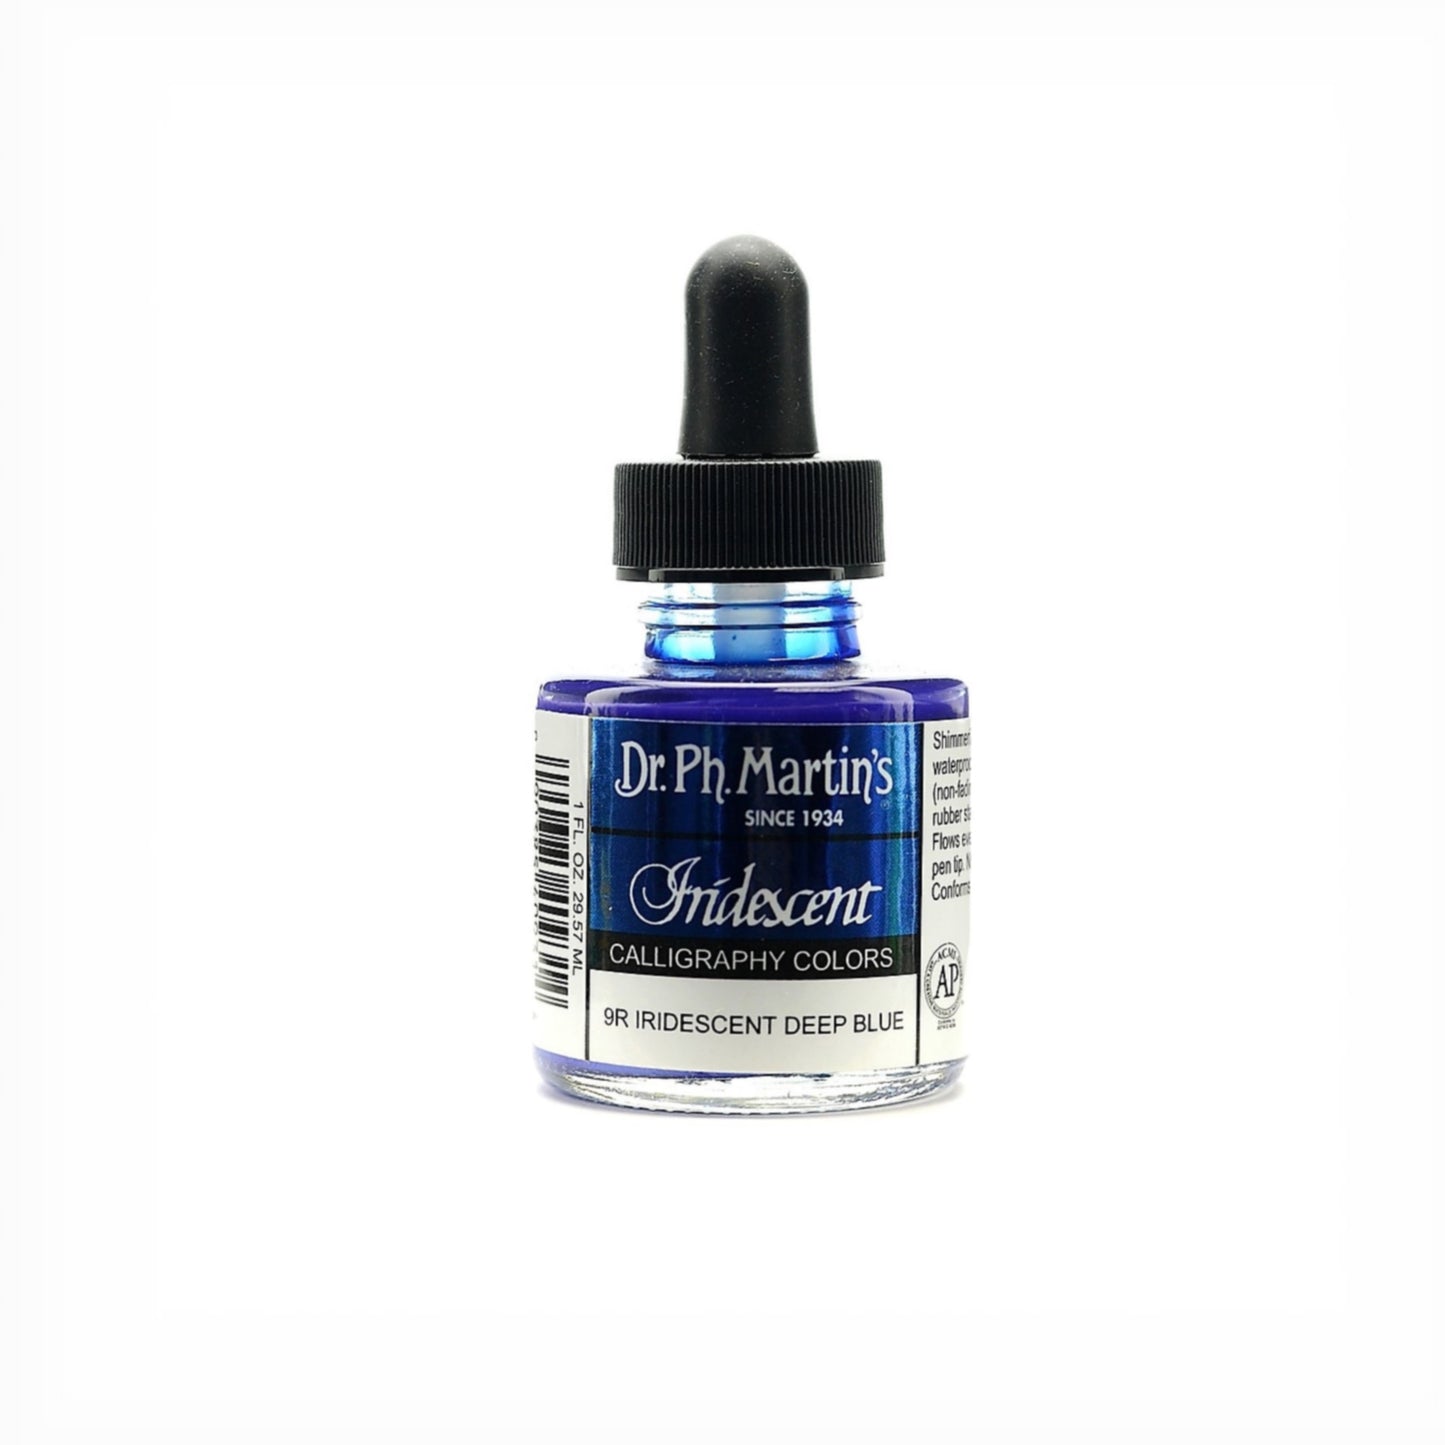 Dr. Ph. Martin's Iridescent Calligraphy Colors - Deep Blue by Dr. Ph. Martin’s - K. A. Artist Shop